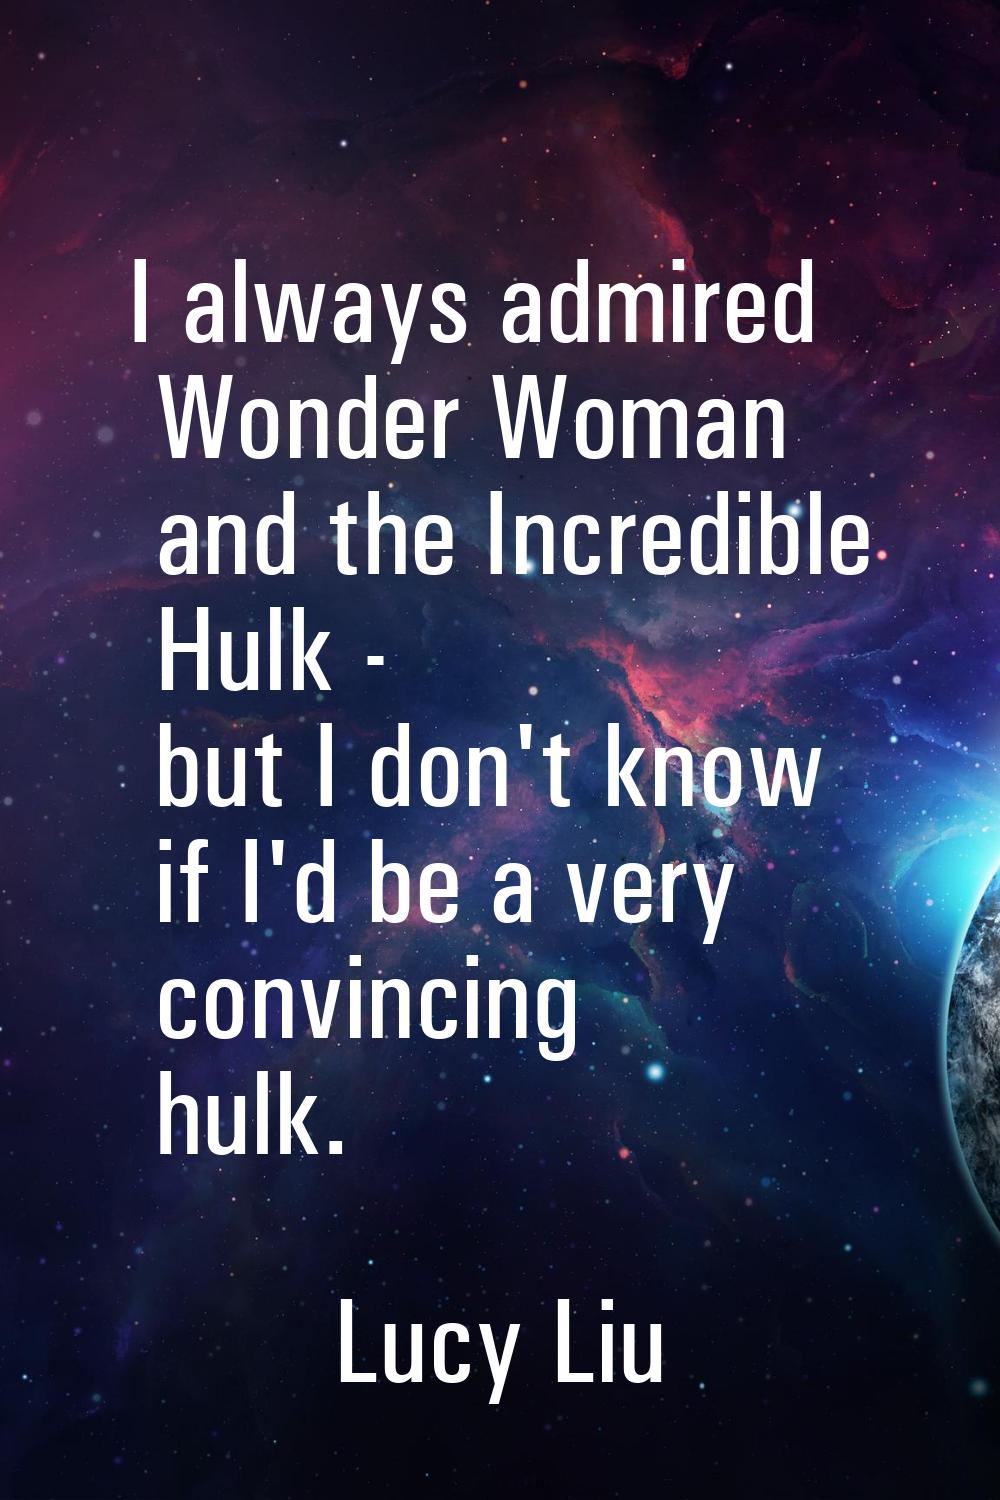 I always admired Wonder Woman and the Incredible Hulk - but I don't know if I'd be a very convincin